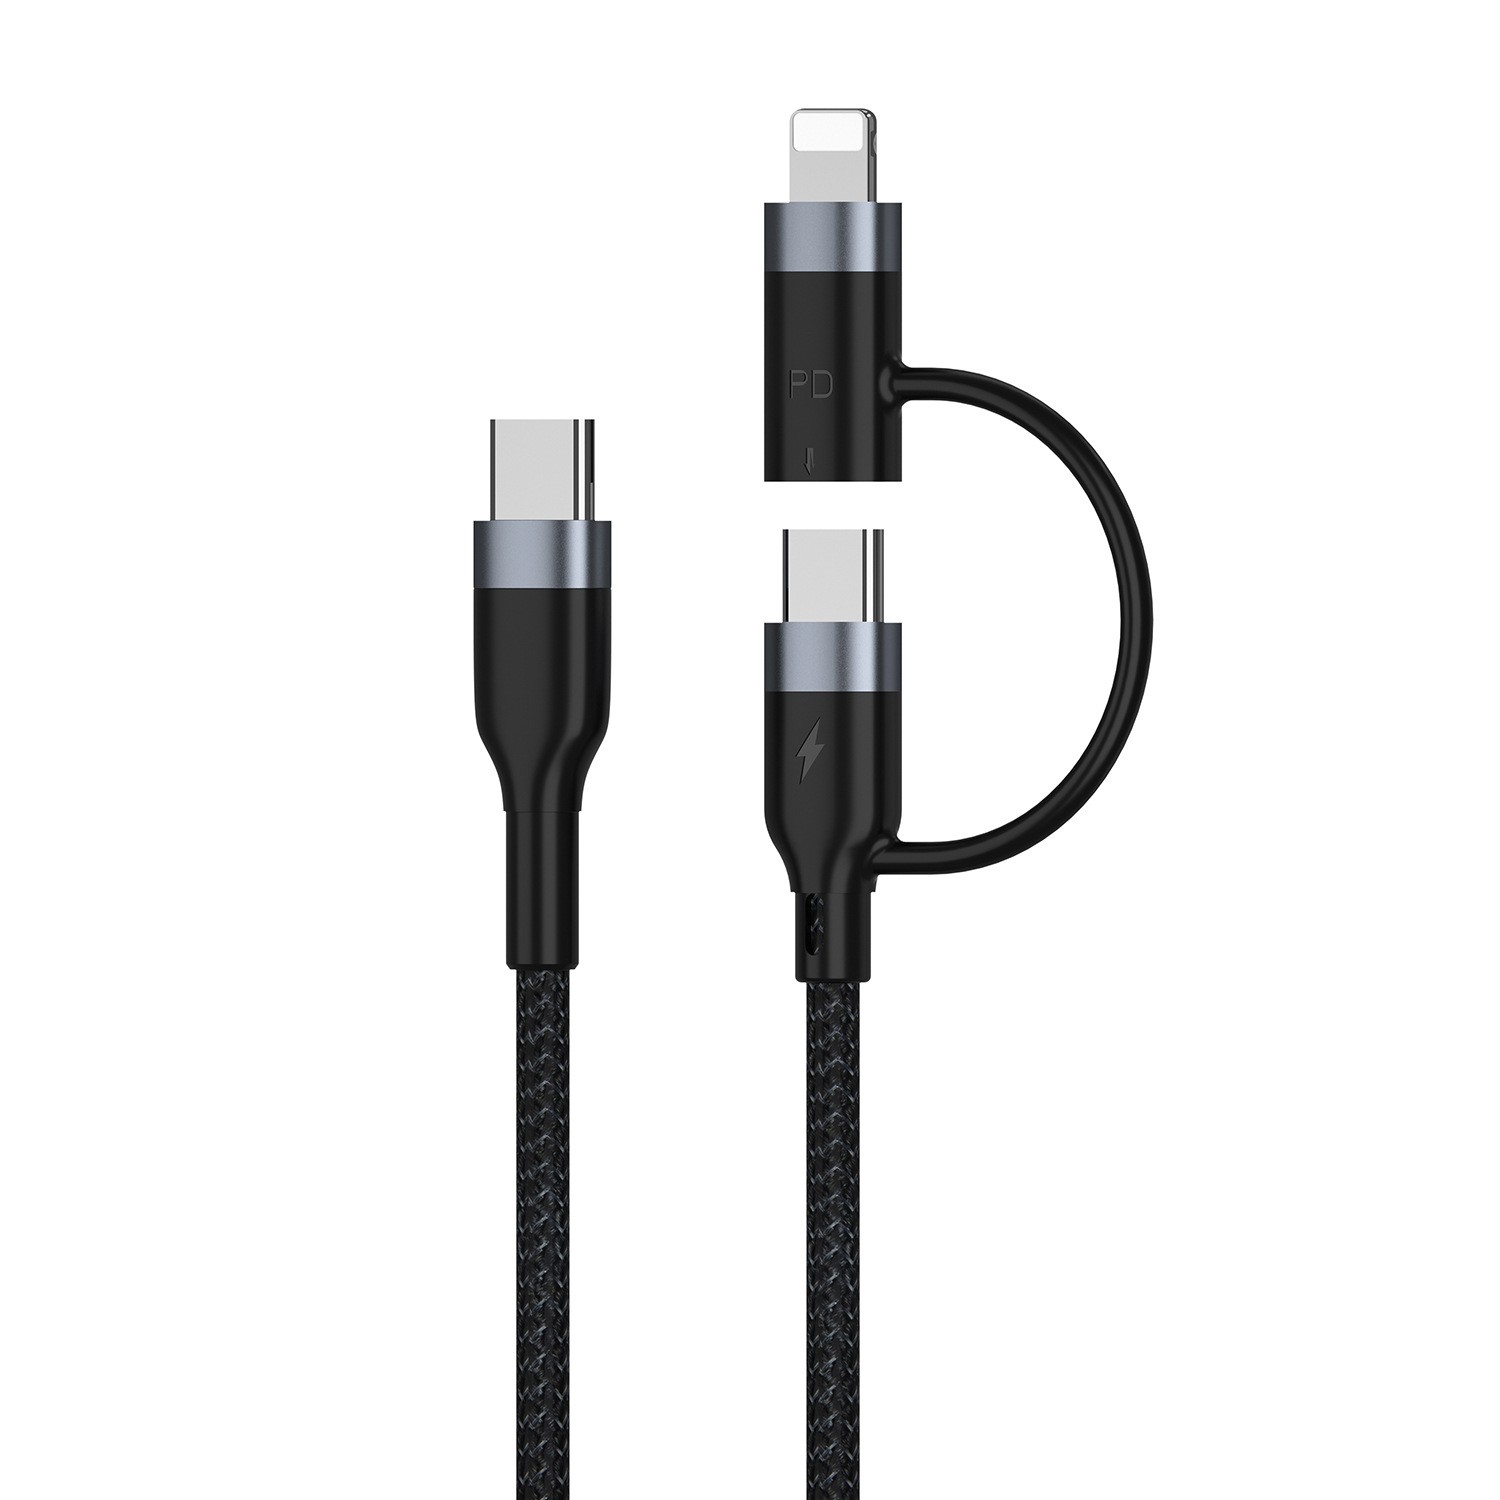 2 in 1 fast charing cable compatibility charging